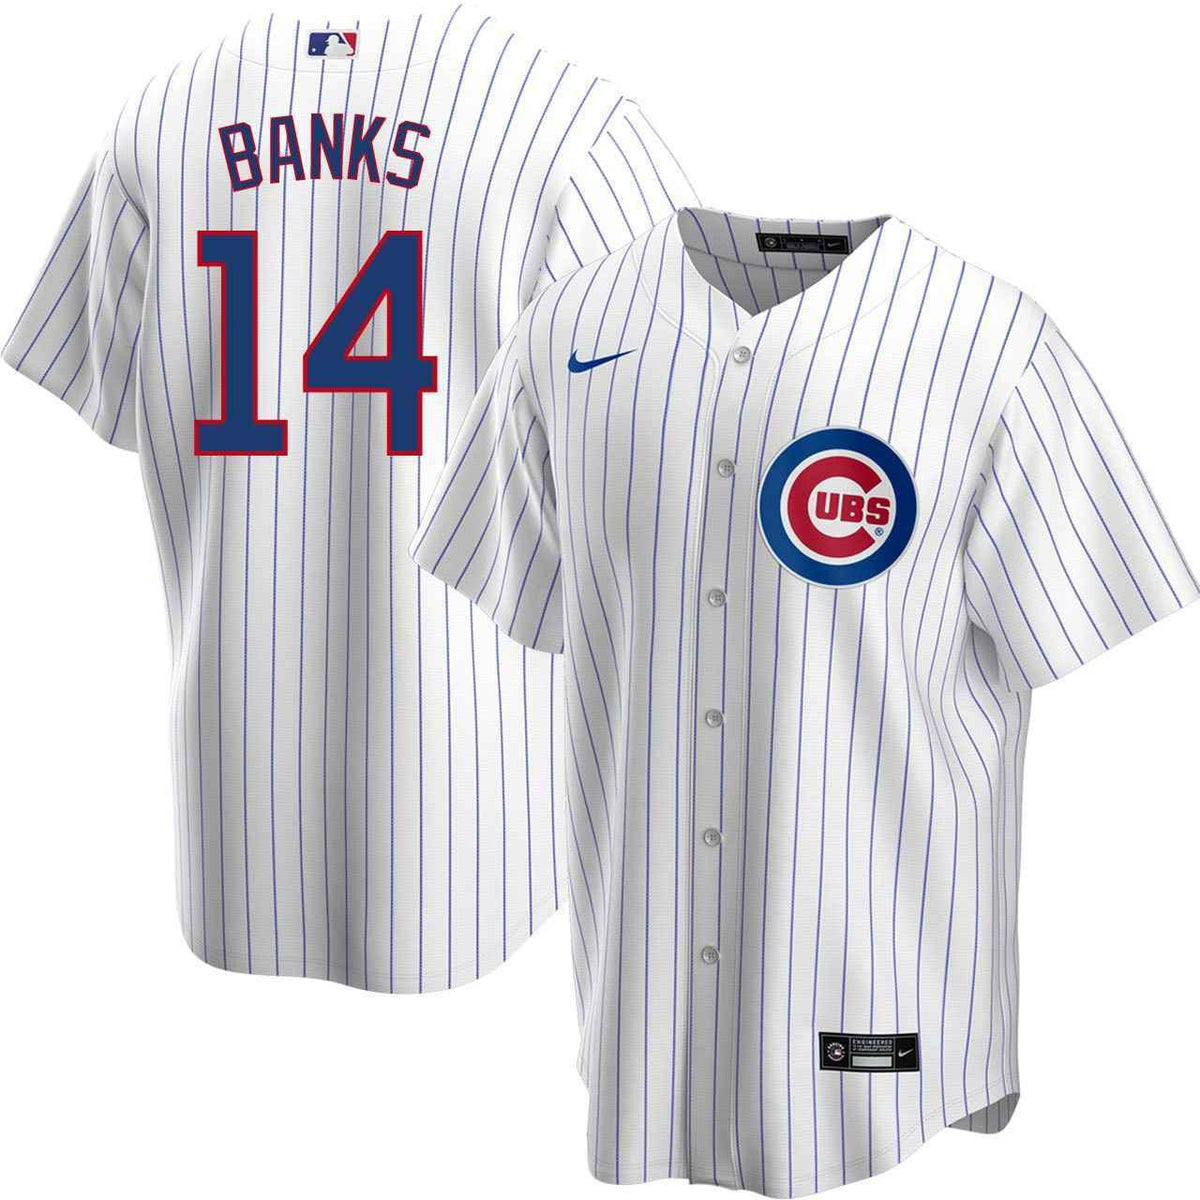 Ernie Banks Chicago Cubs Road Jersey by NIKE